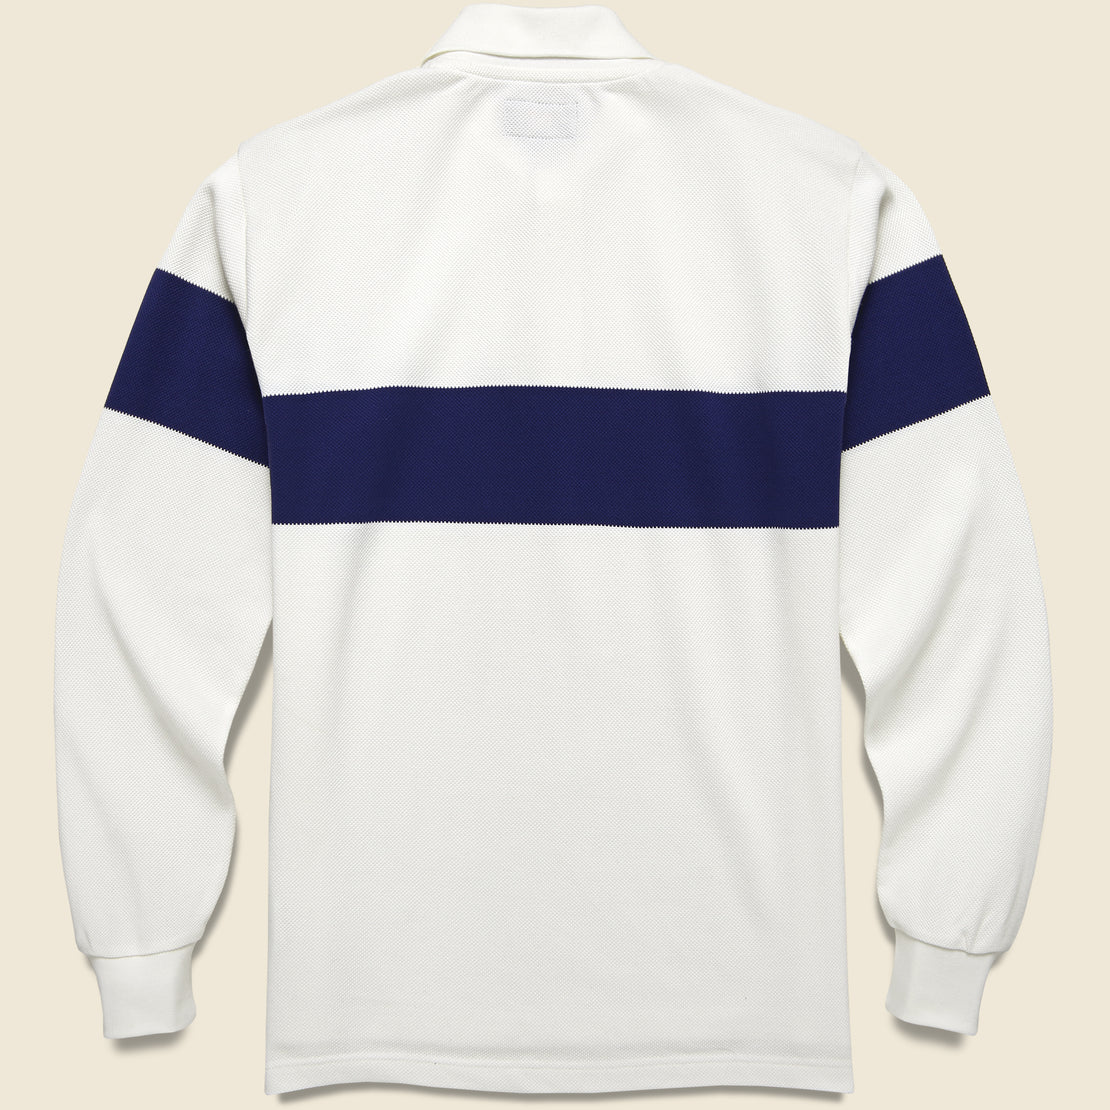 Pique Polo Panel Stripe - White/Navy - BEAMS+ - STAG Provisions - Tops - L/S Knit